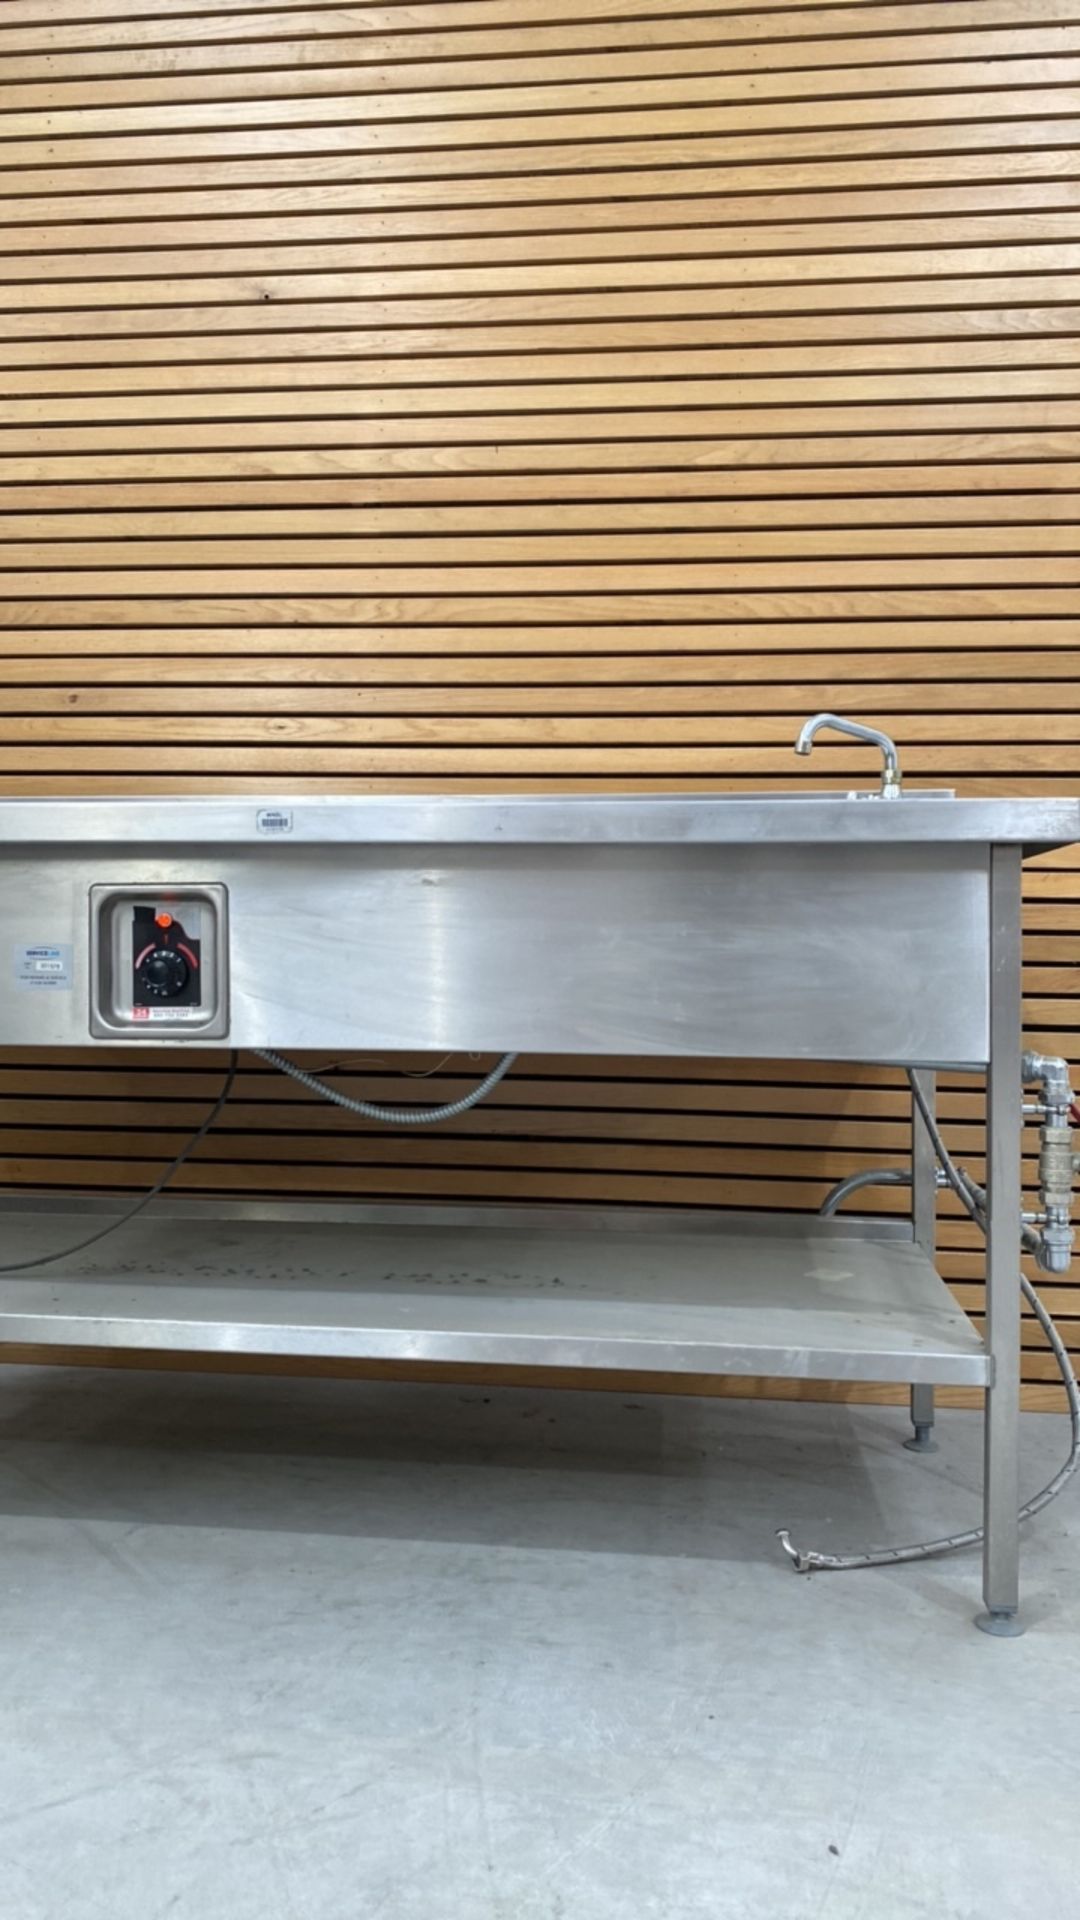 Bain Unit Marie with Sink - Image 6 of 6